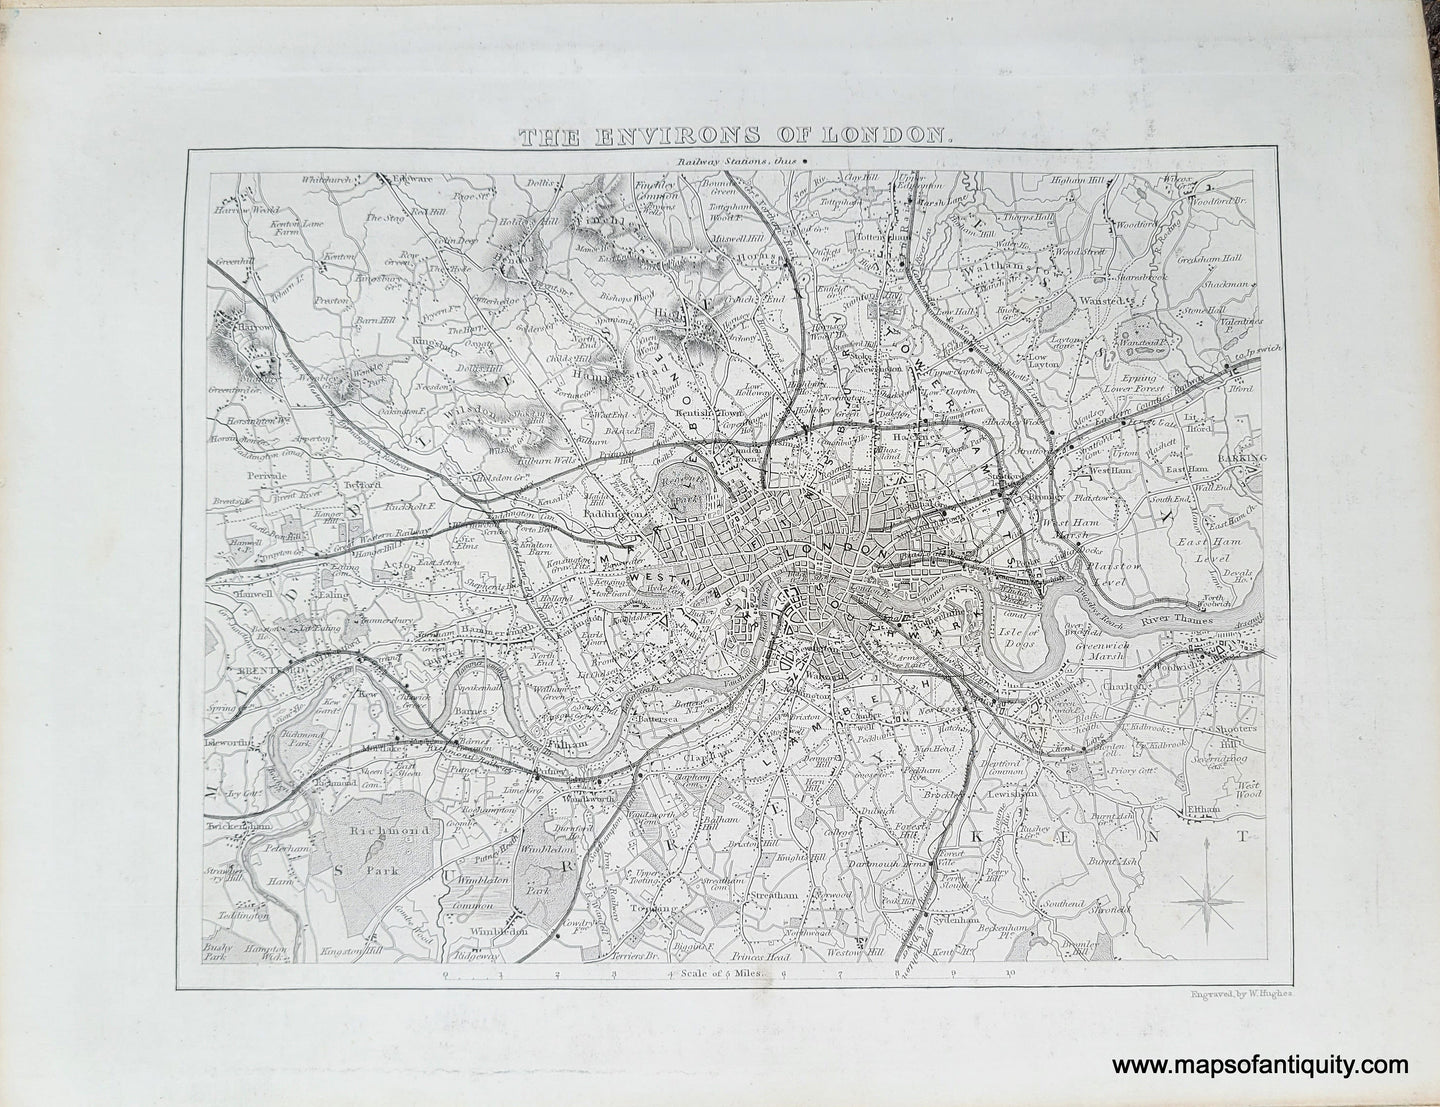 Genuine-Antique-Map-The-Environs-of-London-1850-Virtue-Maps-Of-Antiquity